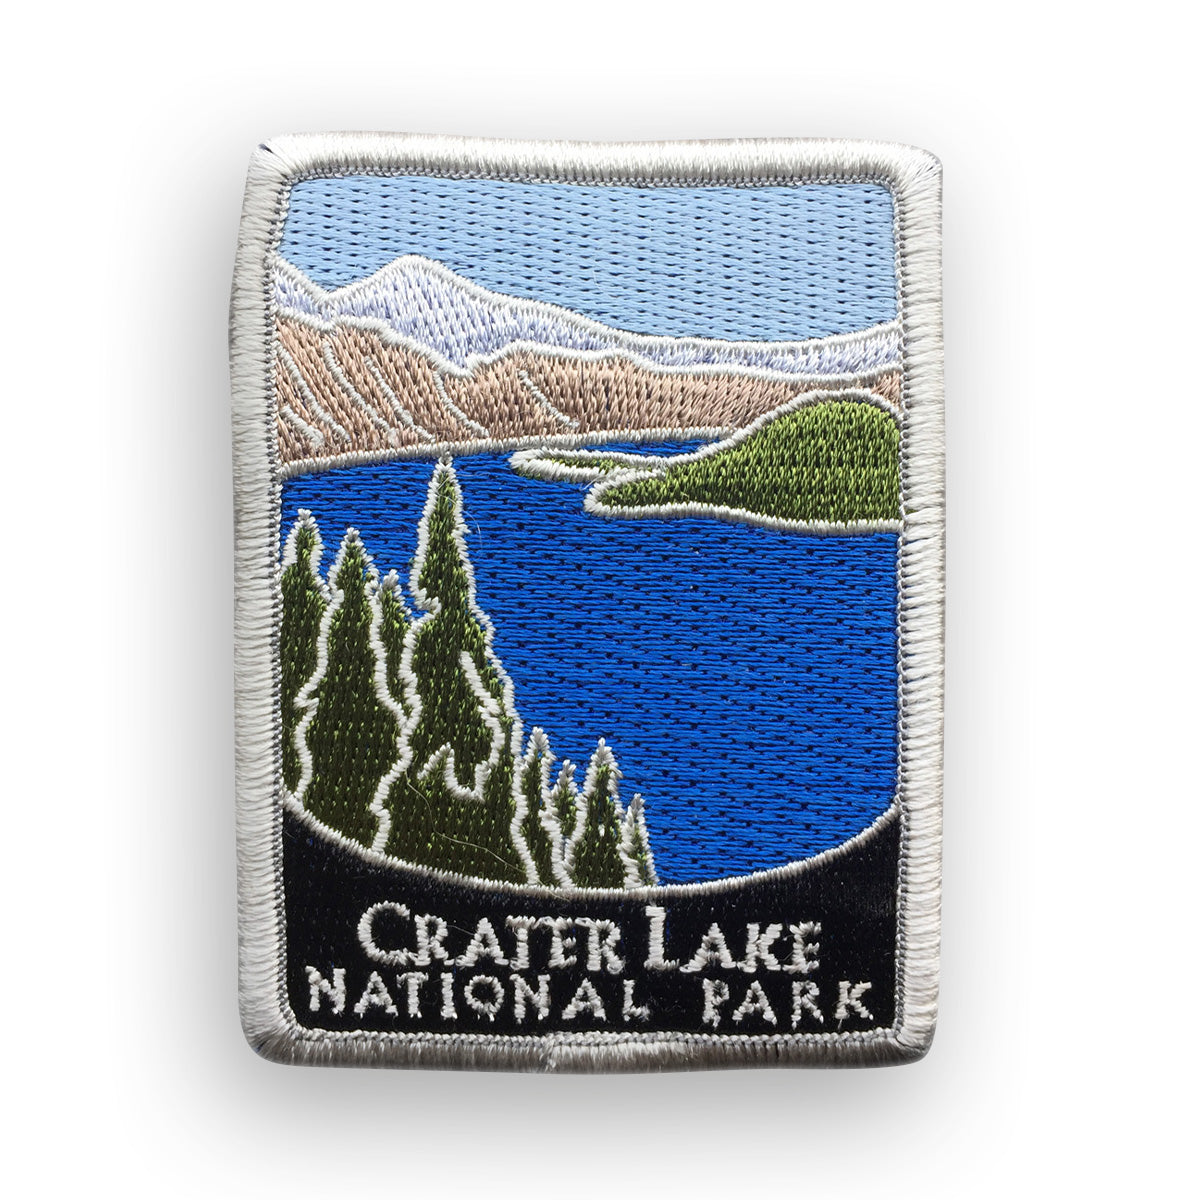 Crater Lake National Park Traveler Patch